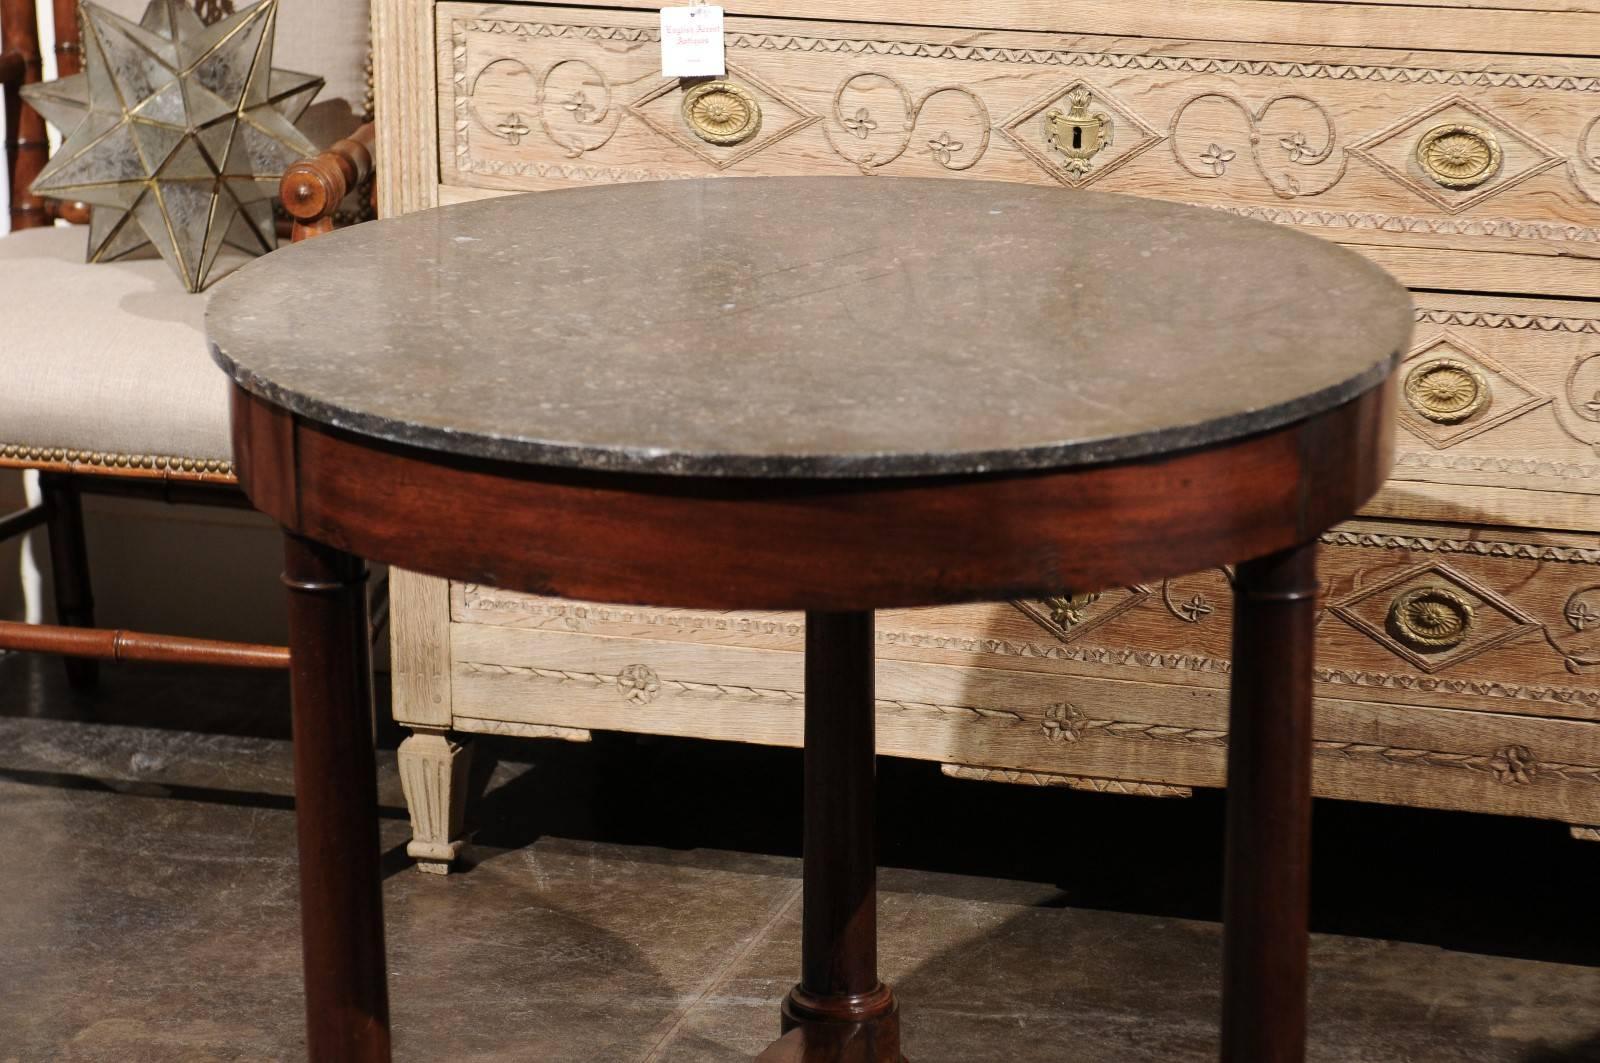 19th Century French Empire Style Mahogany Guéridon Side Table with Marble Top and Column Legs